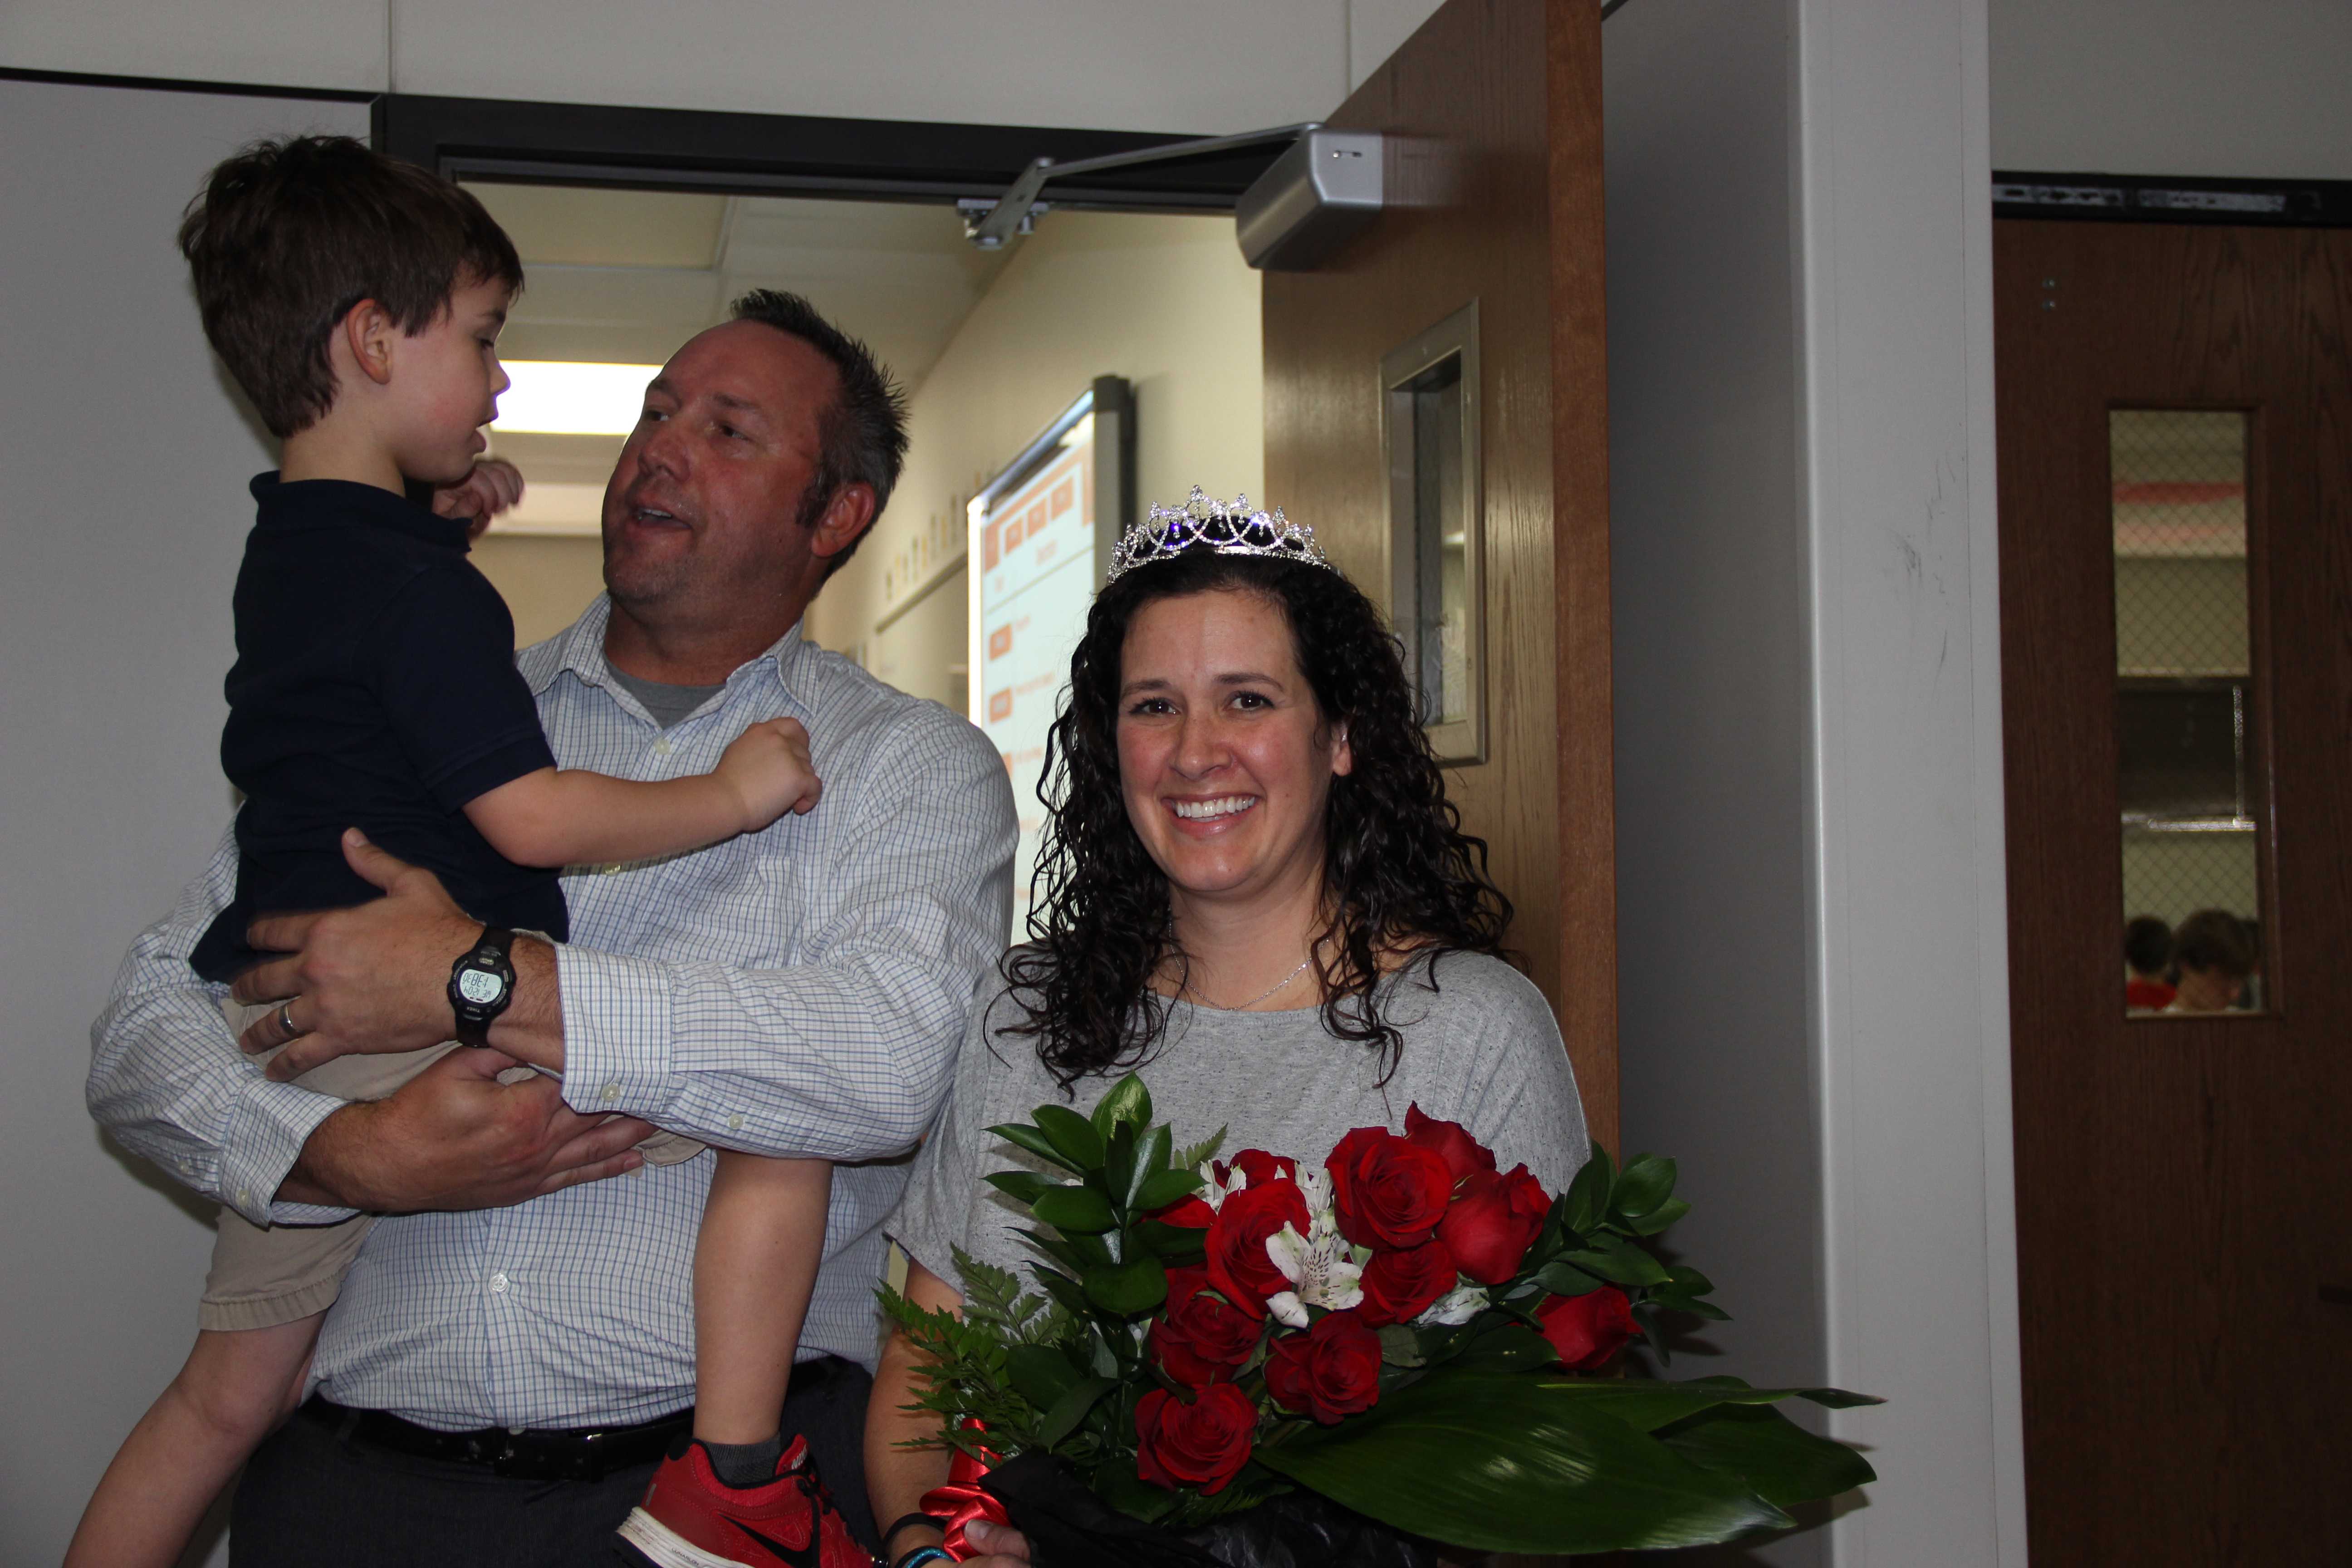 Anatomy and Physiology teacher Jodie Deinhammer, pictured with her husband and son, was named 2013-2014 Coppell High School Teacher of the Year on Wednesday during fifth period.  Photo by Jena Seidemann